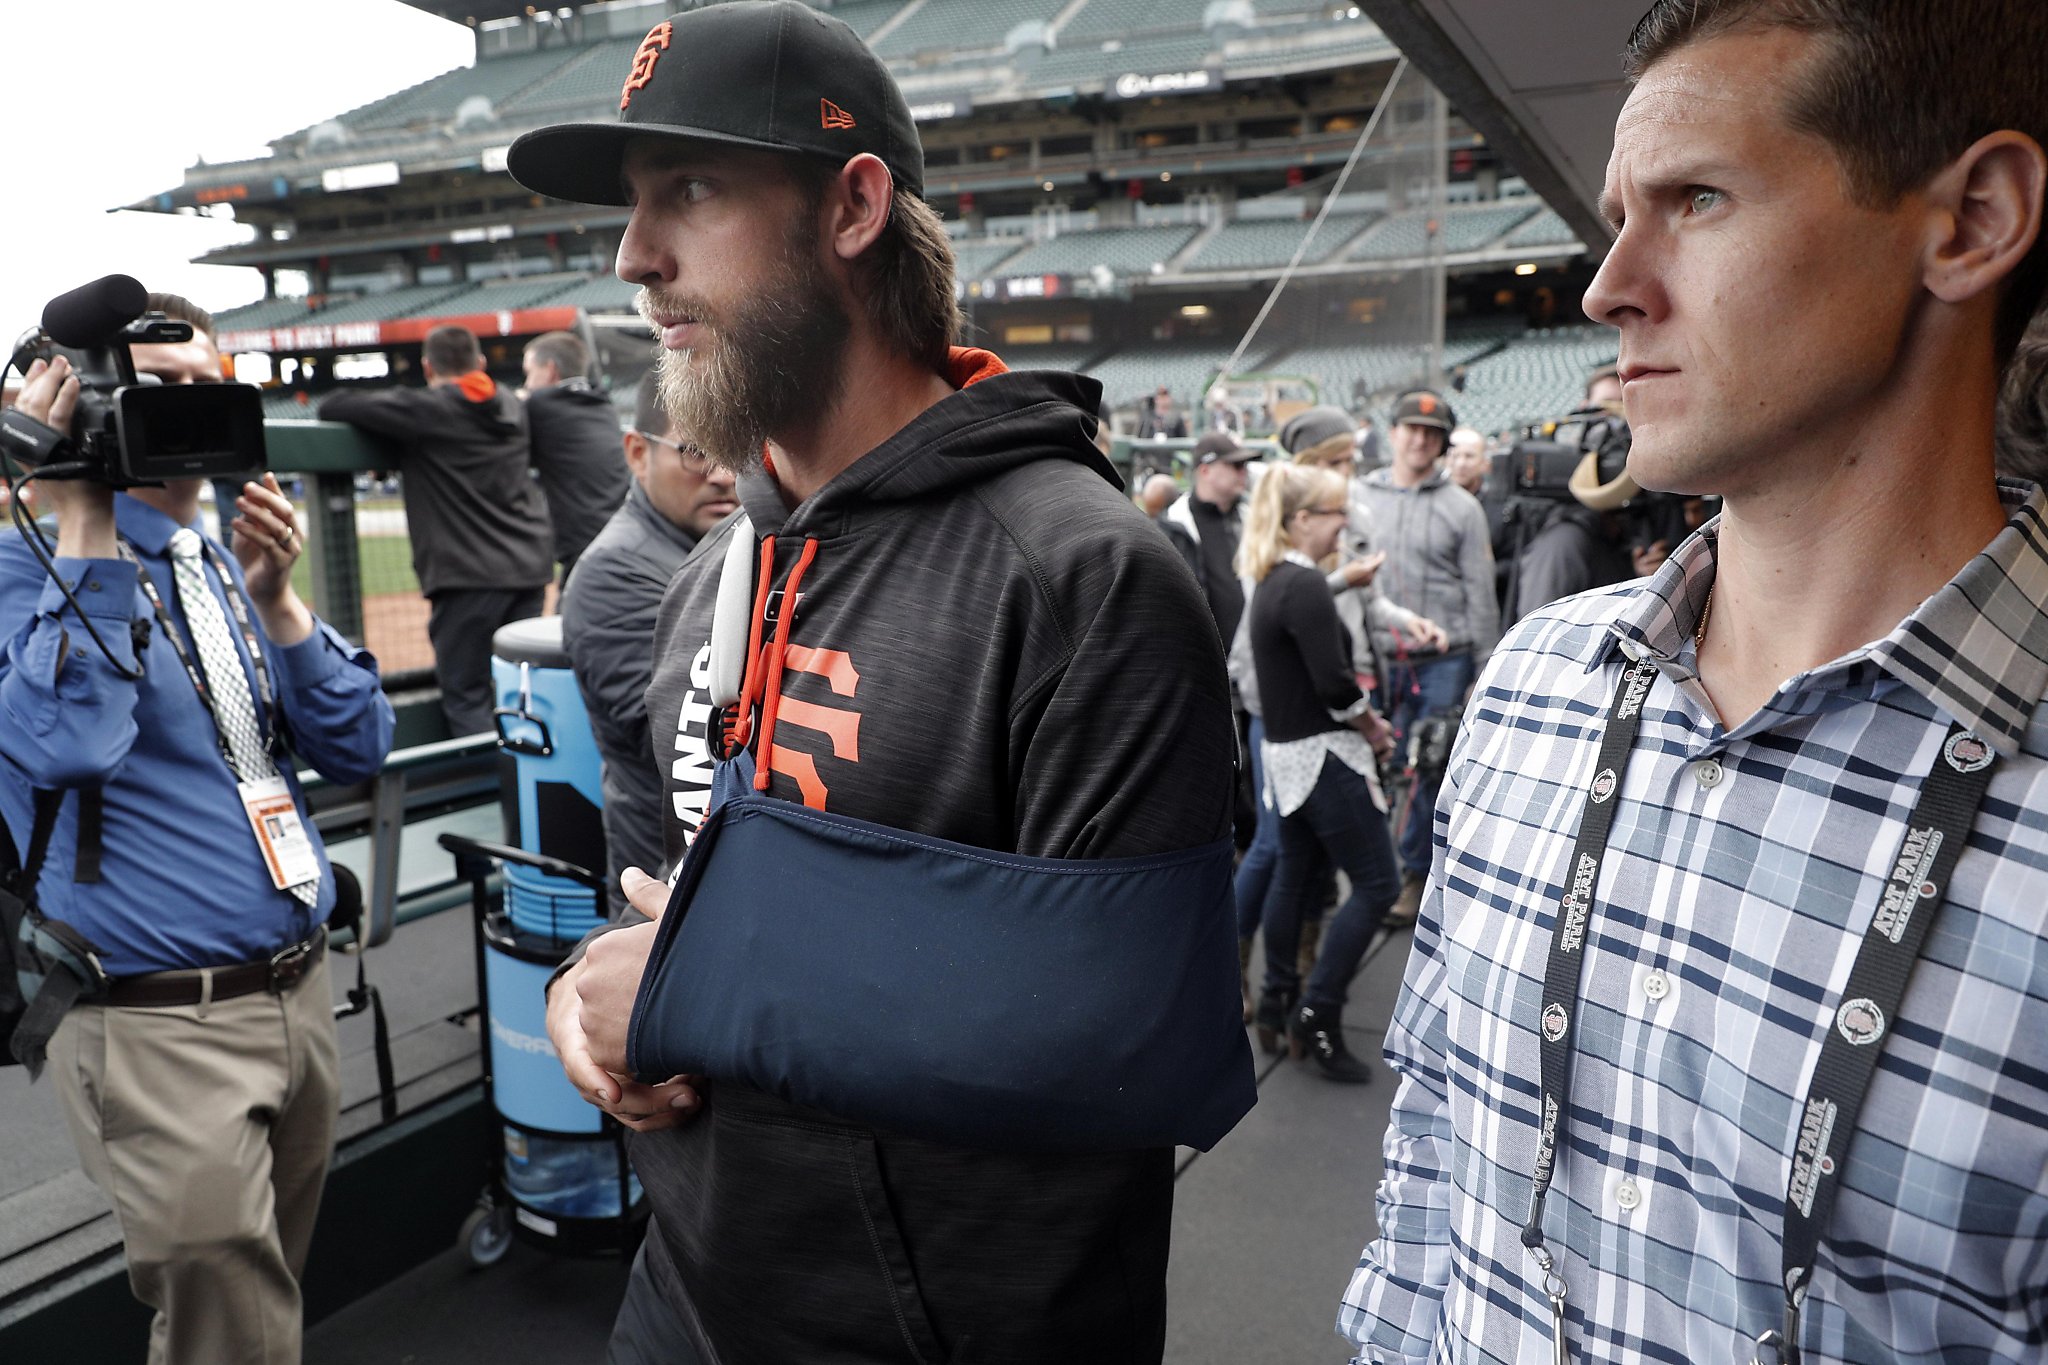 No harm, no foul after Madison Bumgarner misquote - Los Angeles Times